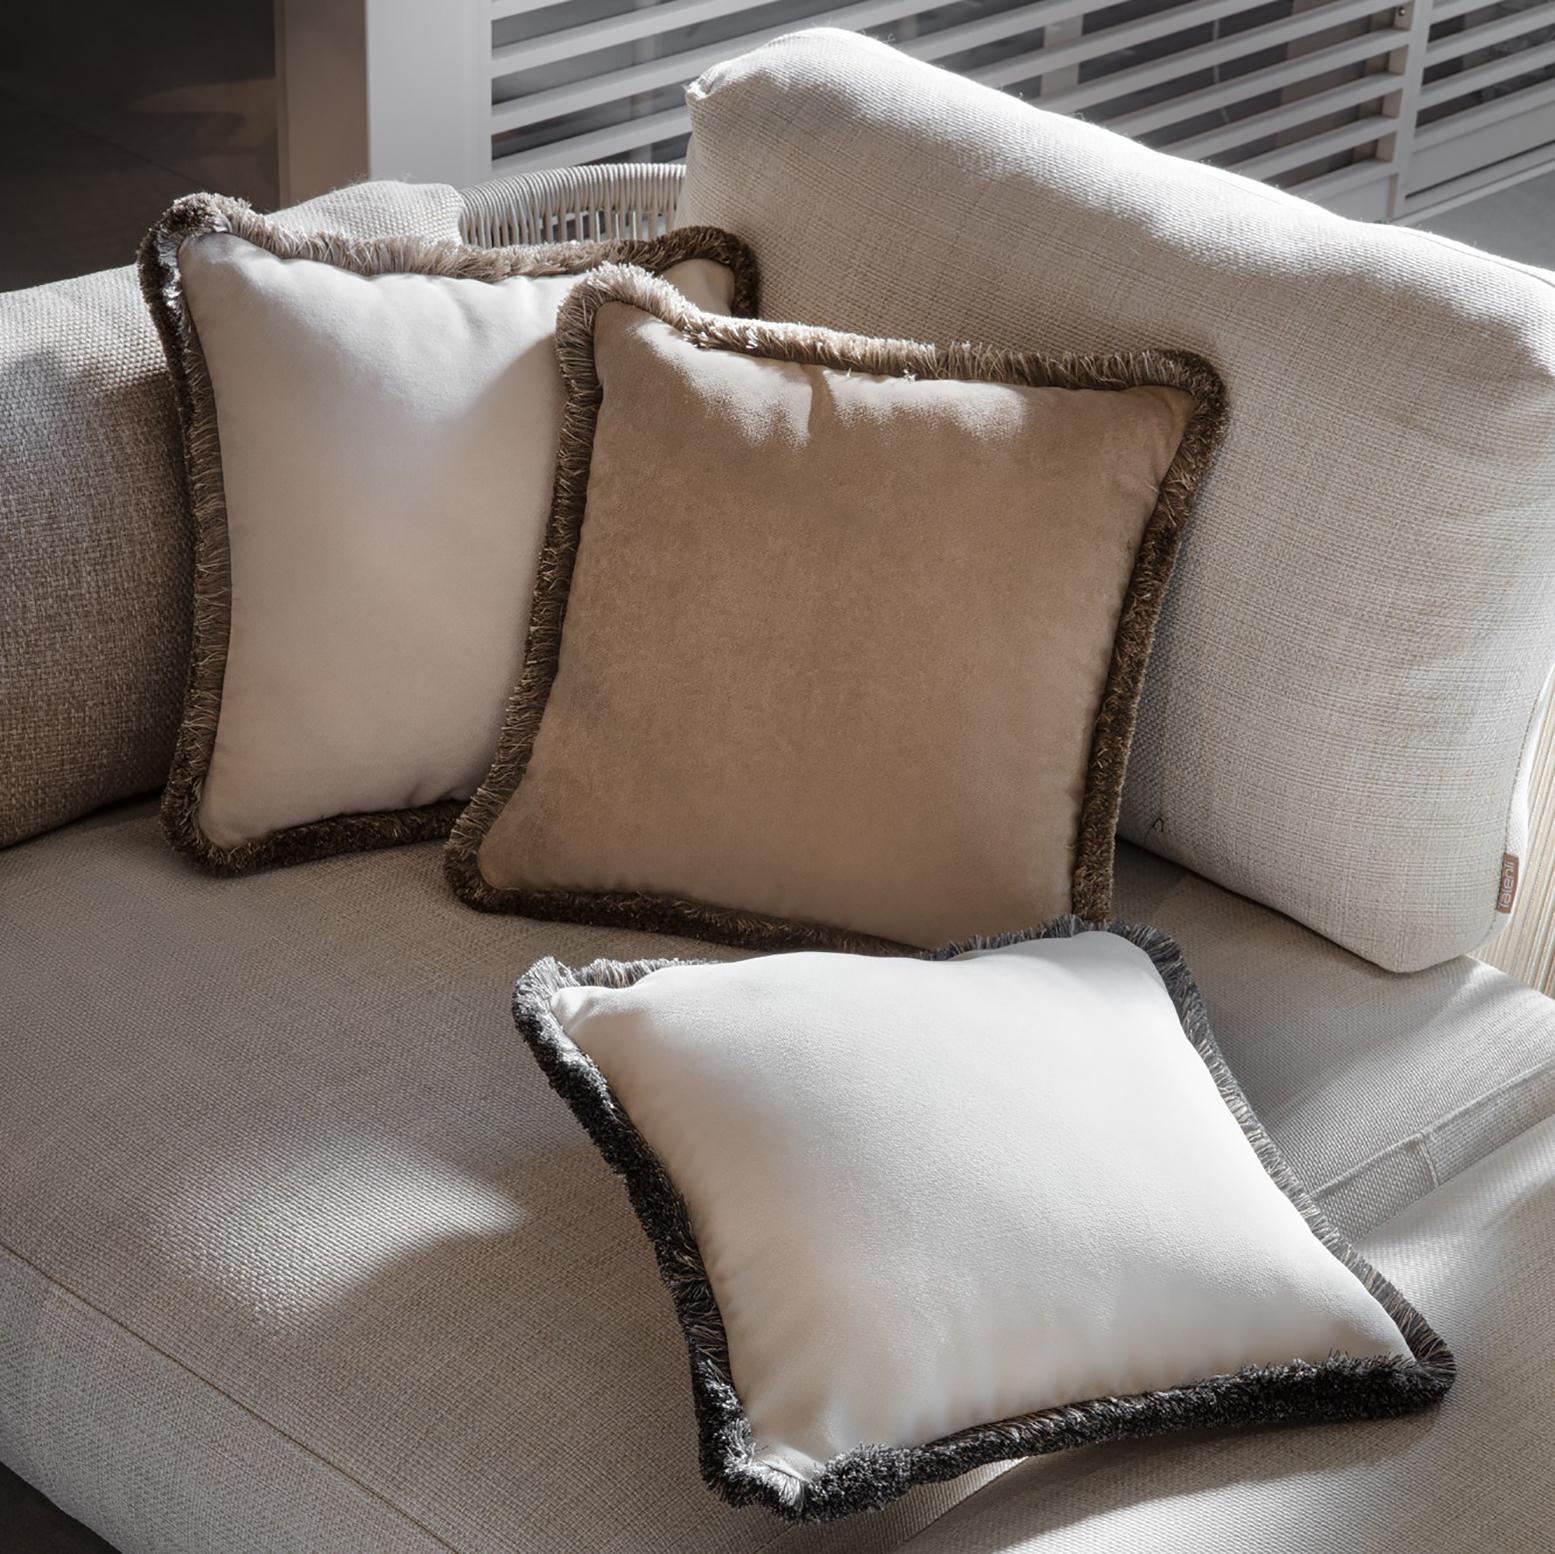 This elegant cushion cover was carefully hand-sewn with soft, white velvet and contoured by a prestigiuos multicolour cotton fringe. A sophisticated addition to a classic or contemporary sofa alike, it can be paired with a twin for a coordinated